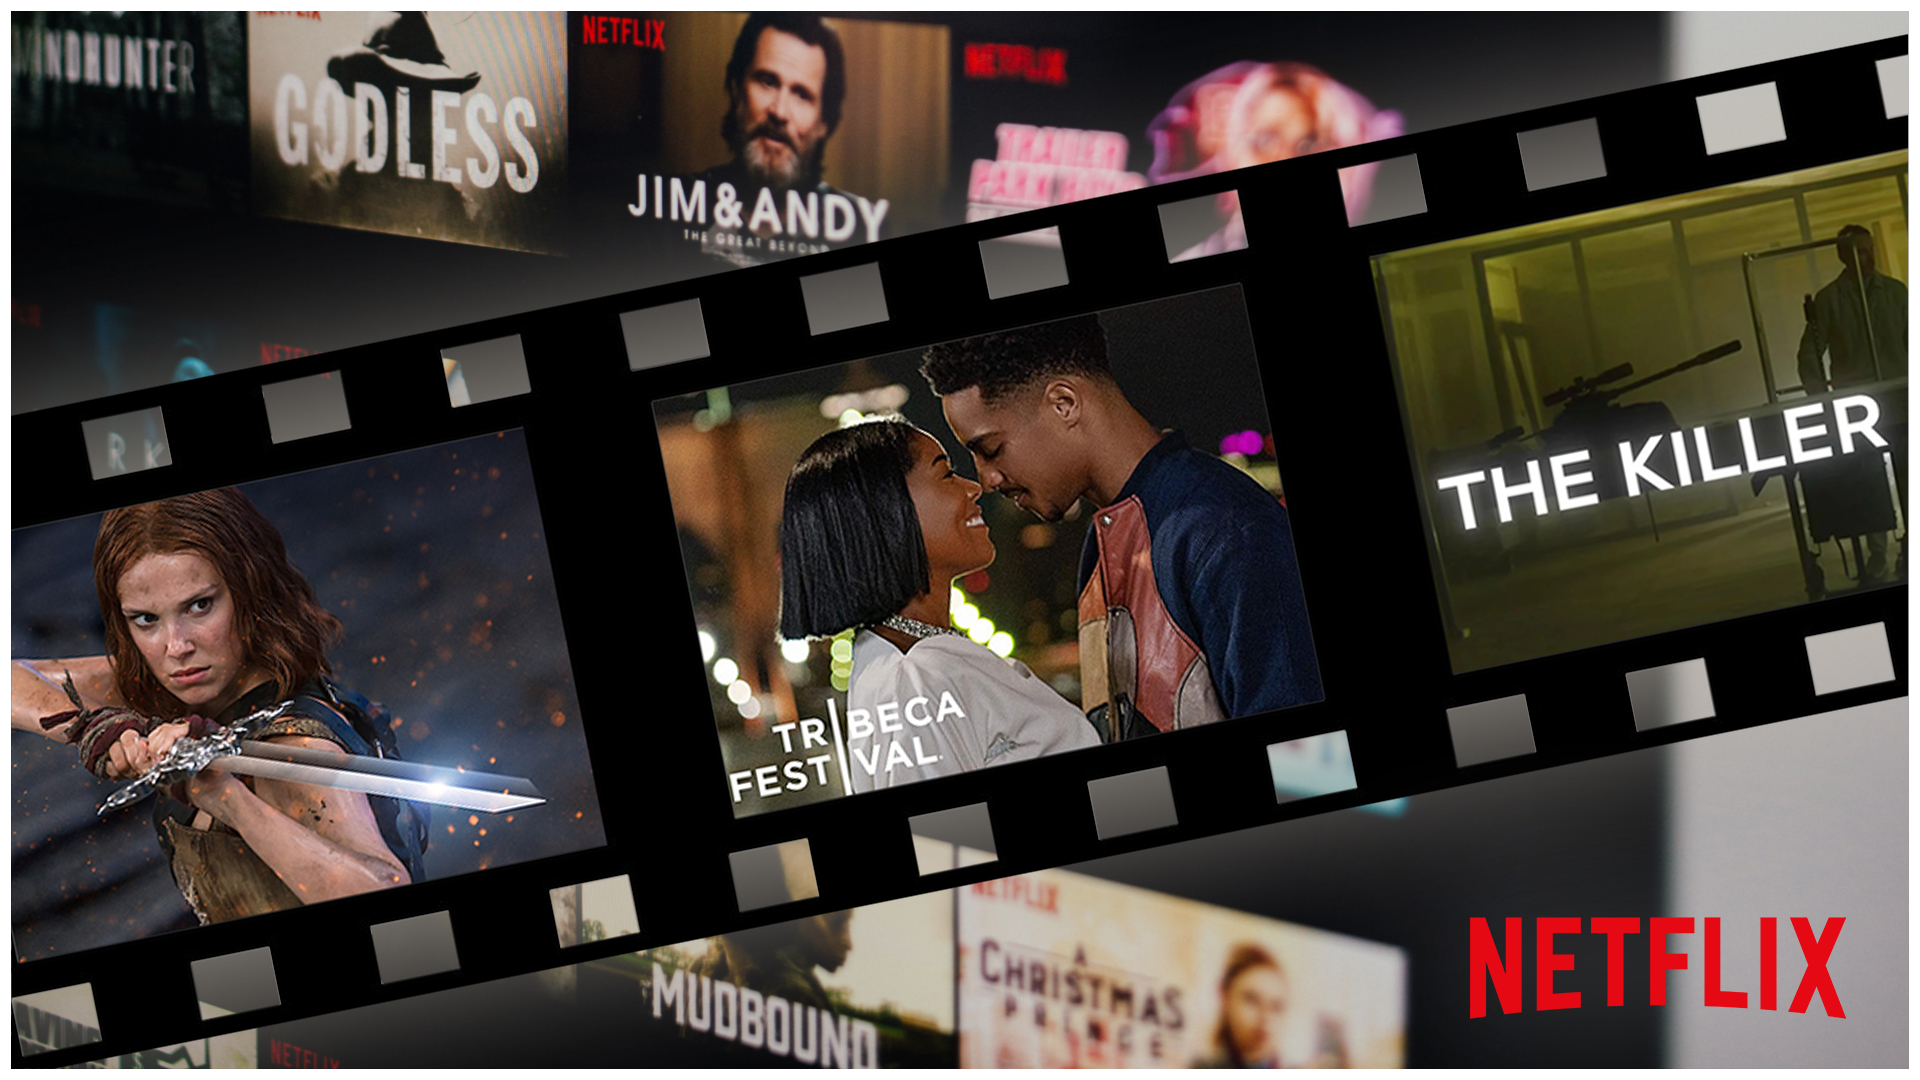 Here are 7 Netflix movies to add to your towatch list